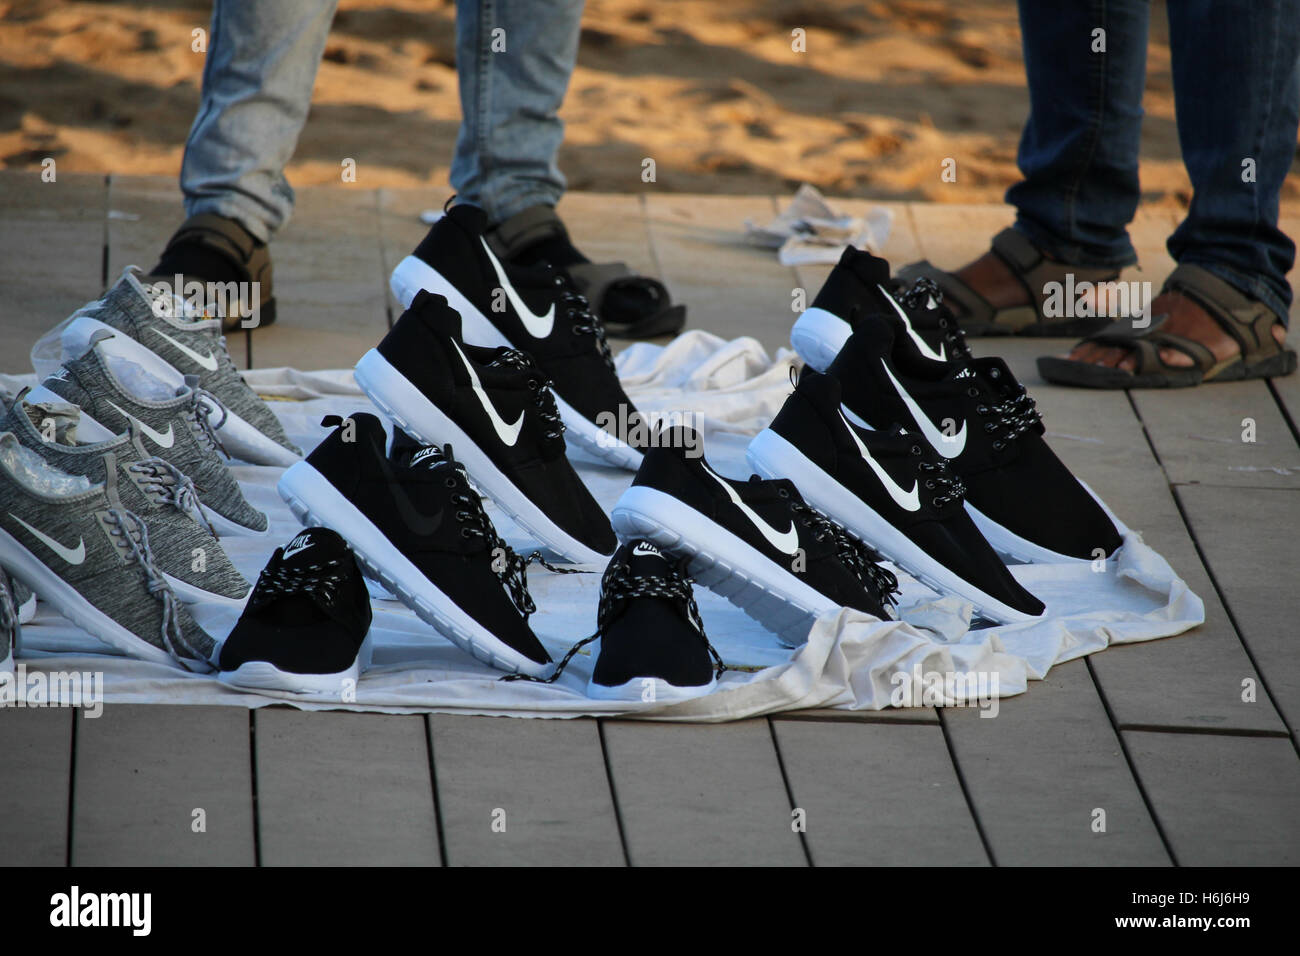 Barcelona, Spain - October 29, 2016: Copies of popular brands of shoes sold on the Barceloneta beach. Although it is illegal, the phenomenon called 'top manta' is extended in central Barcelona, with hundreds of street sellers in the most popular tourist locations of the city Credit:  Dino Geromella/Alamy Live News Stock Photo